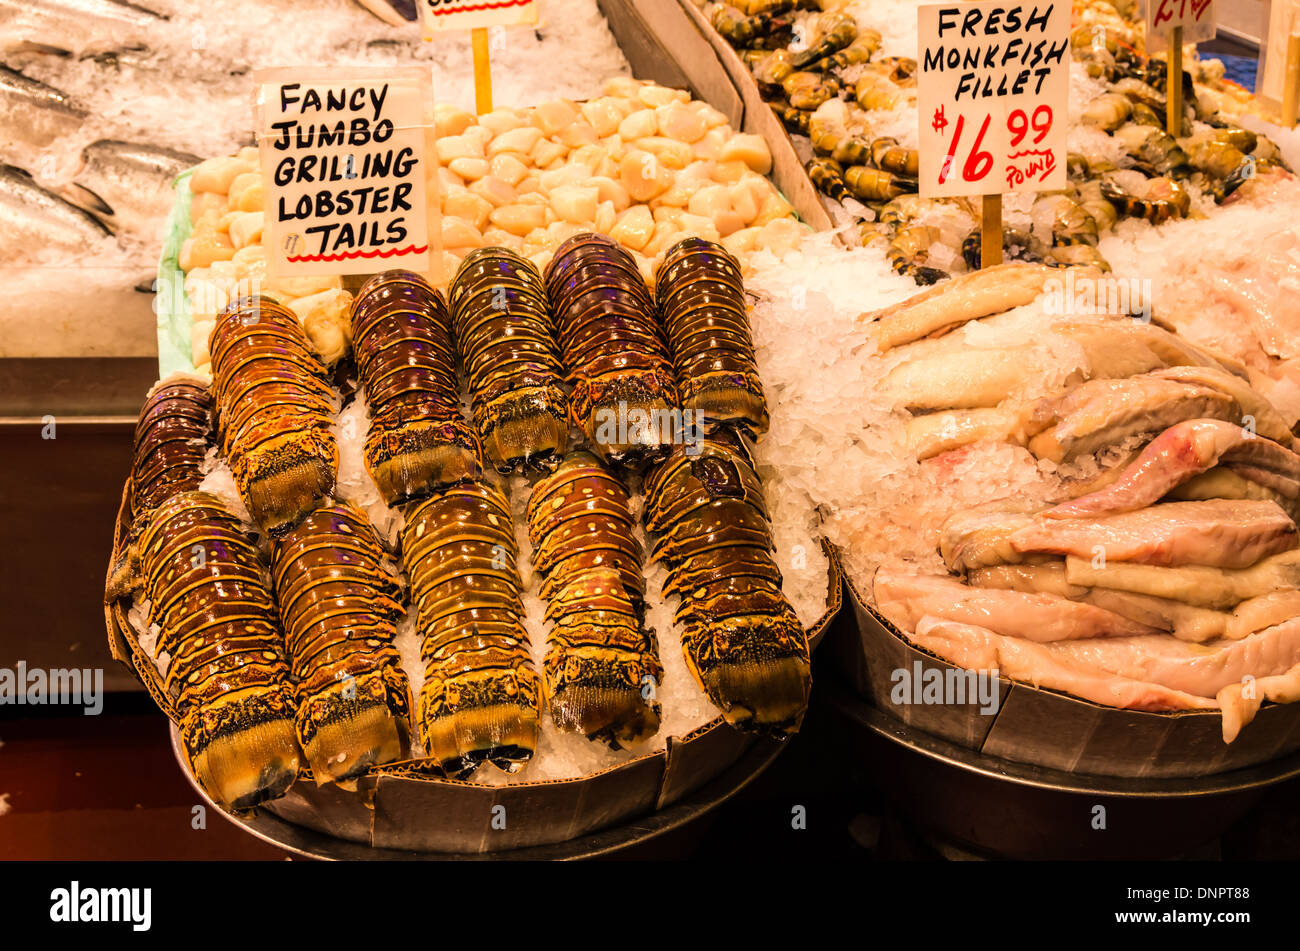 Lobster tails on ice with seafood in fish monger's stall Pike Place Market Seattle ,Washington, USA Stock Photo